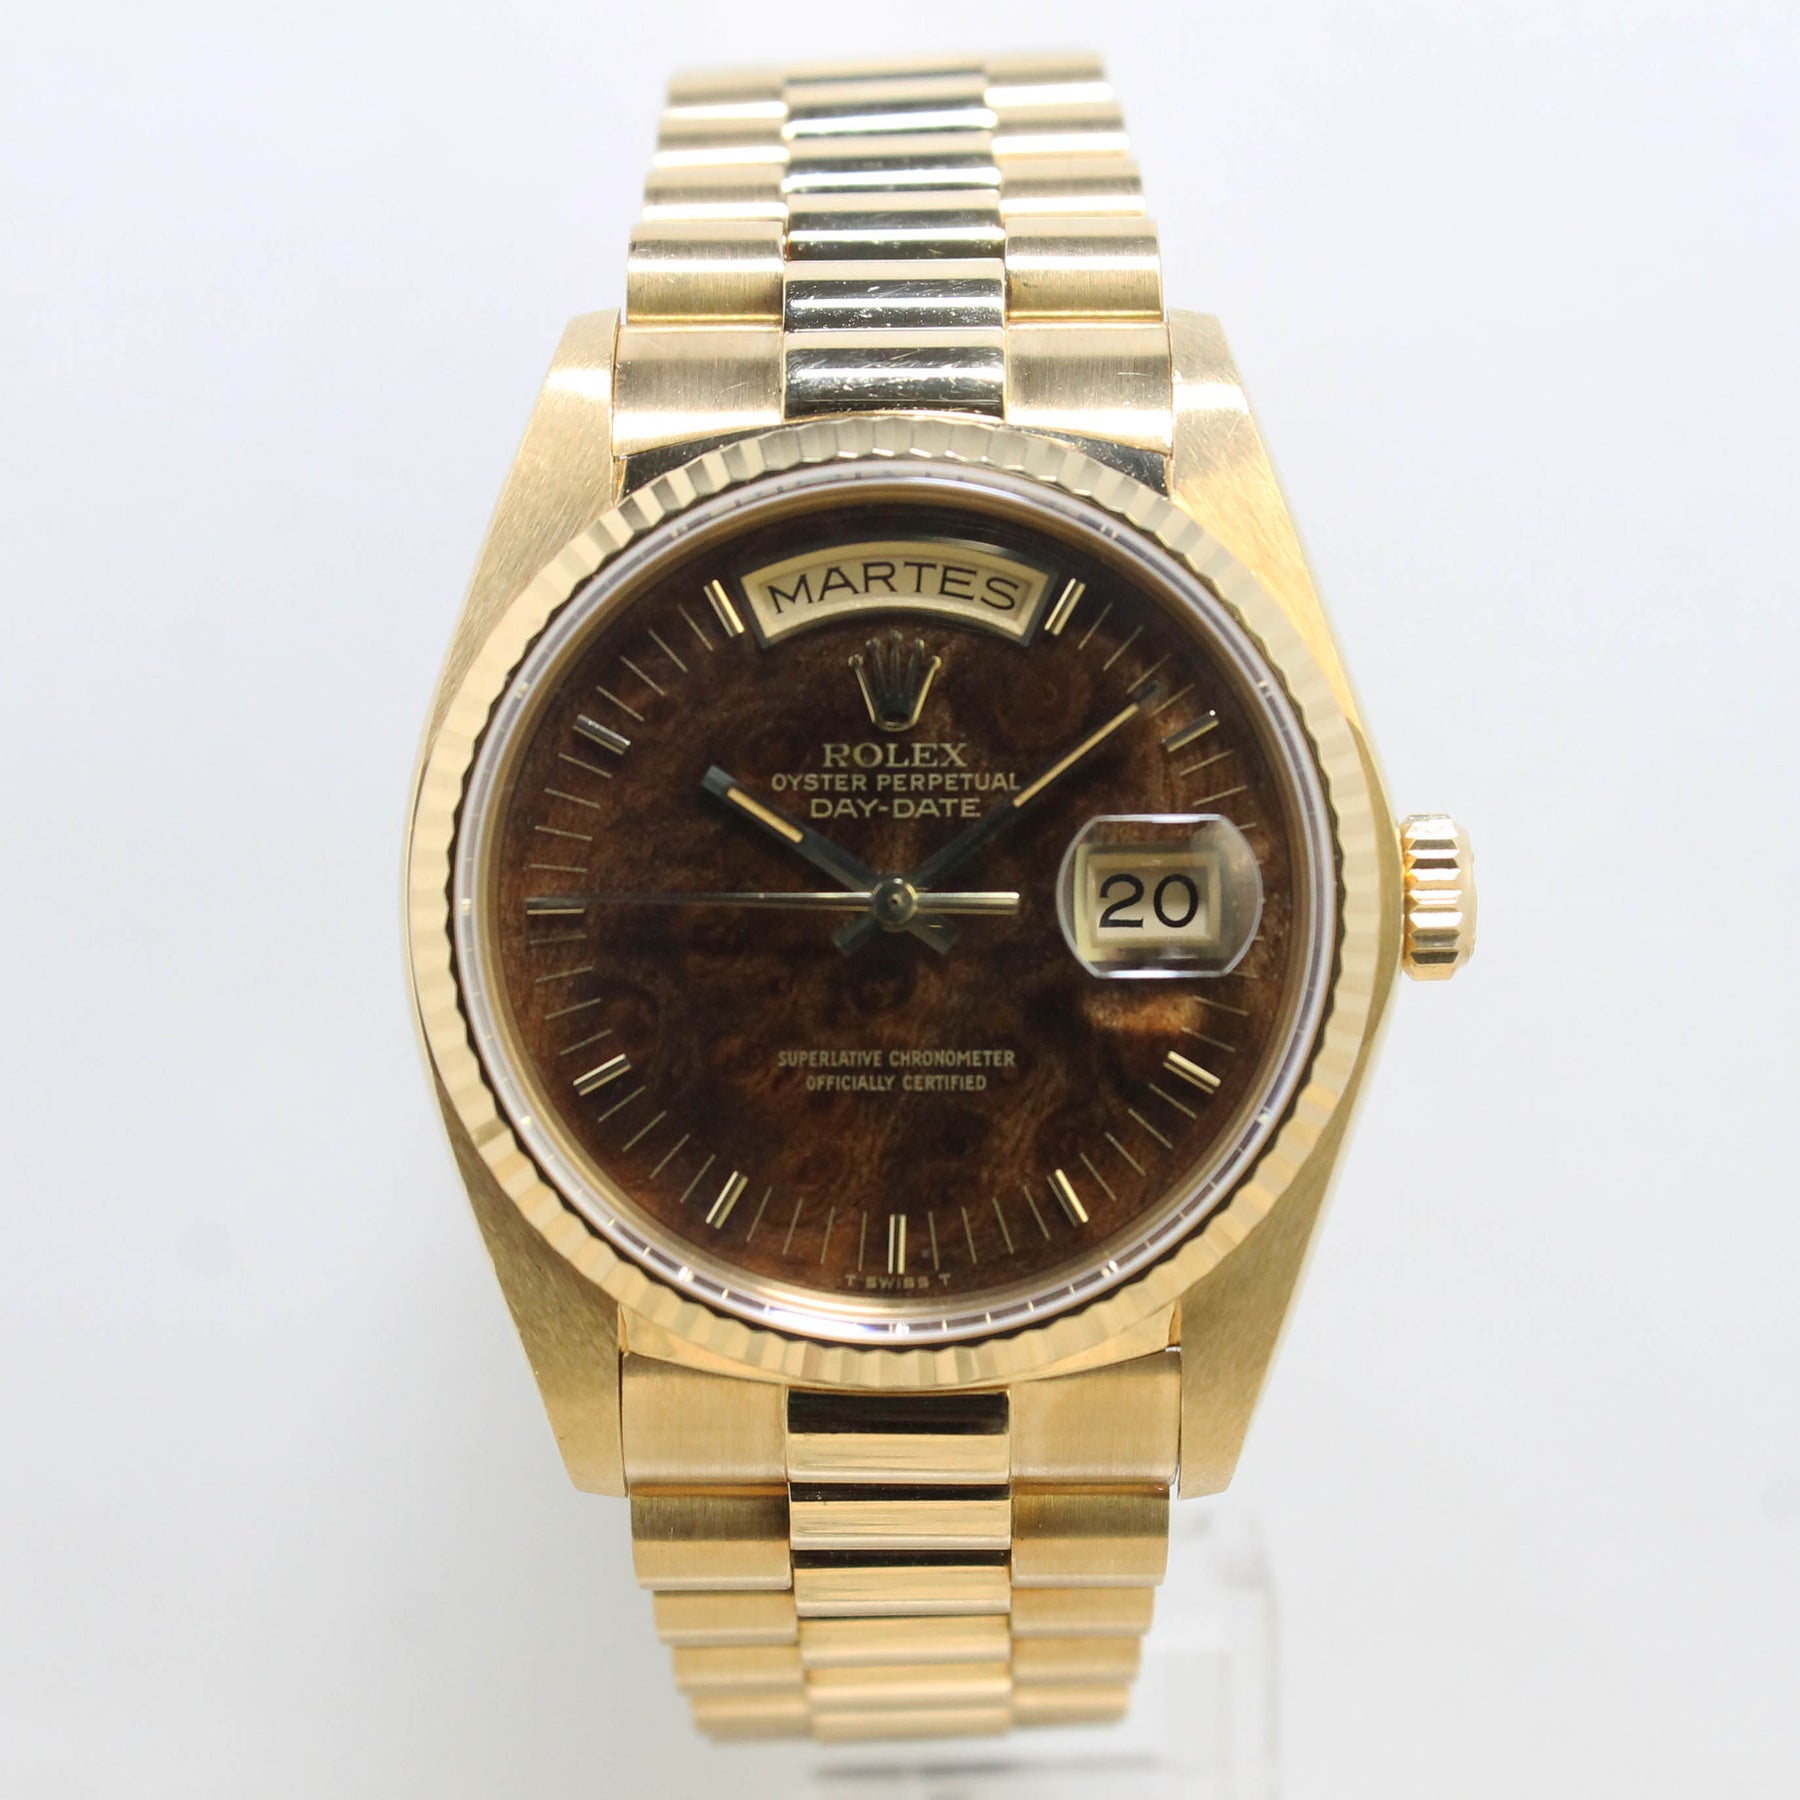 1980 Rolex Day Date 'Like New' with Burl Wood Dial Ref. 18038